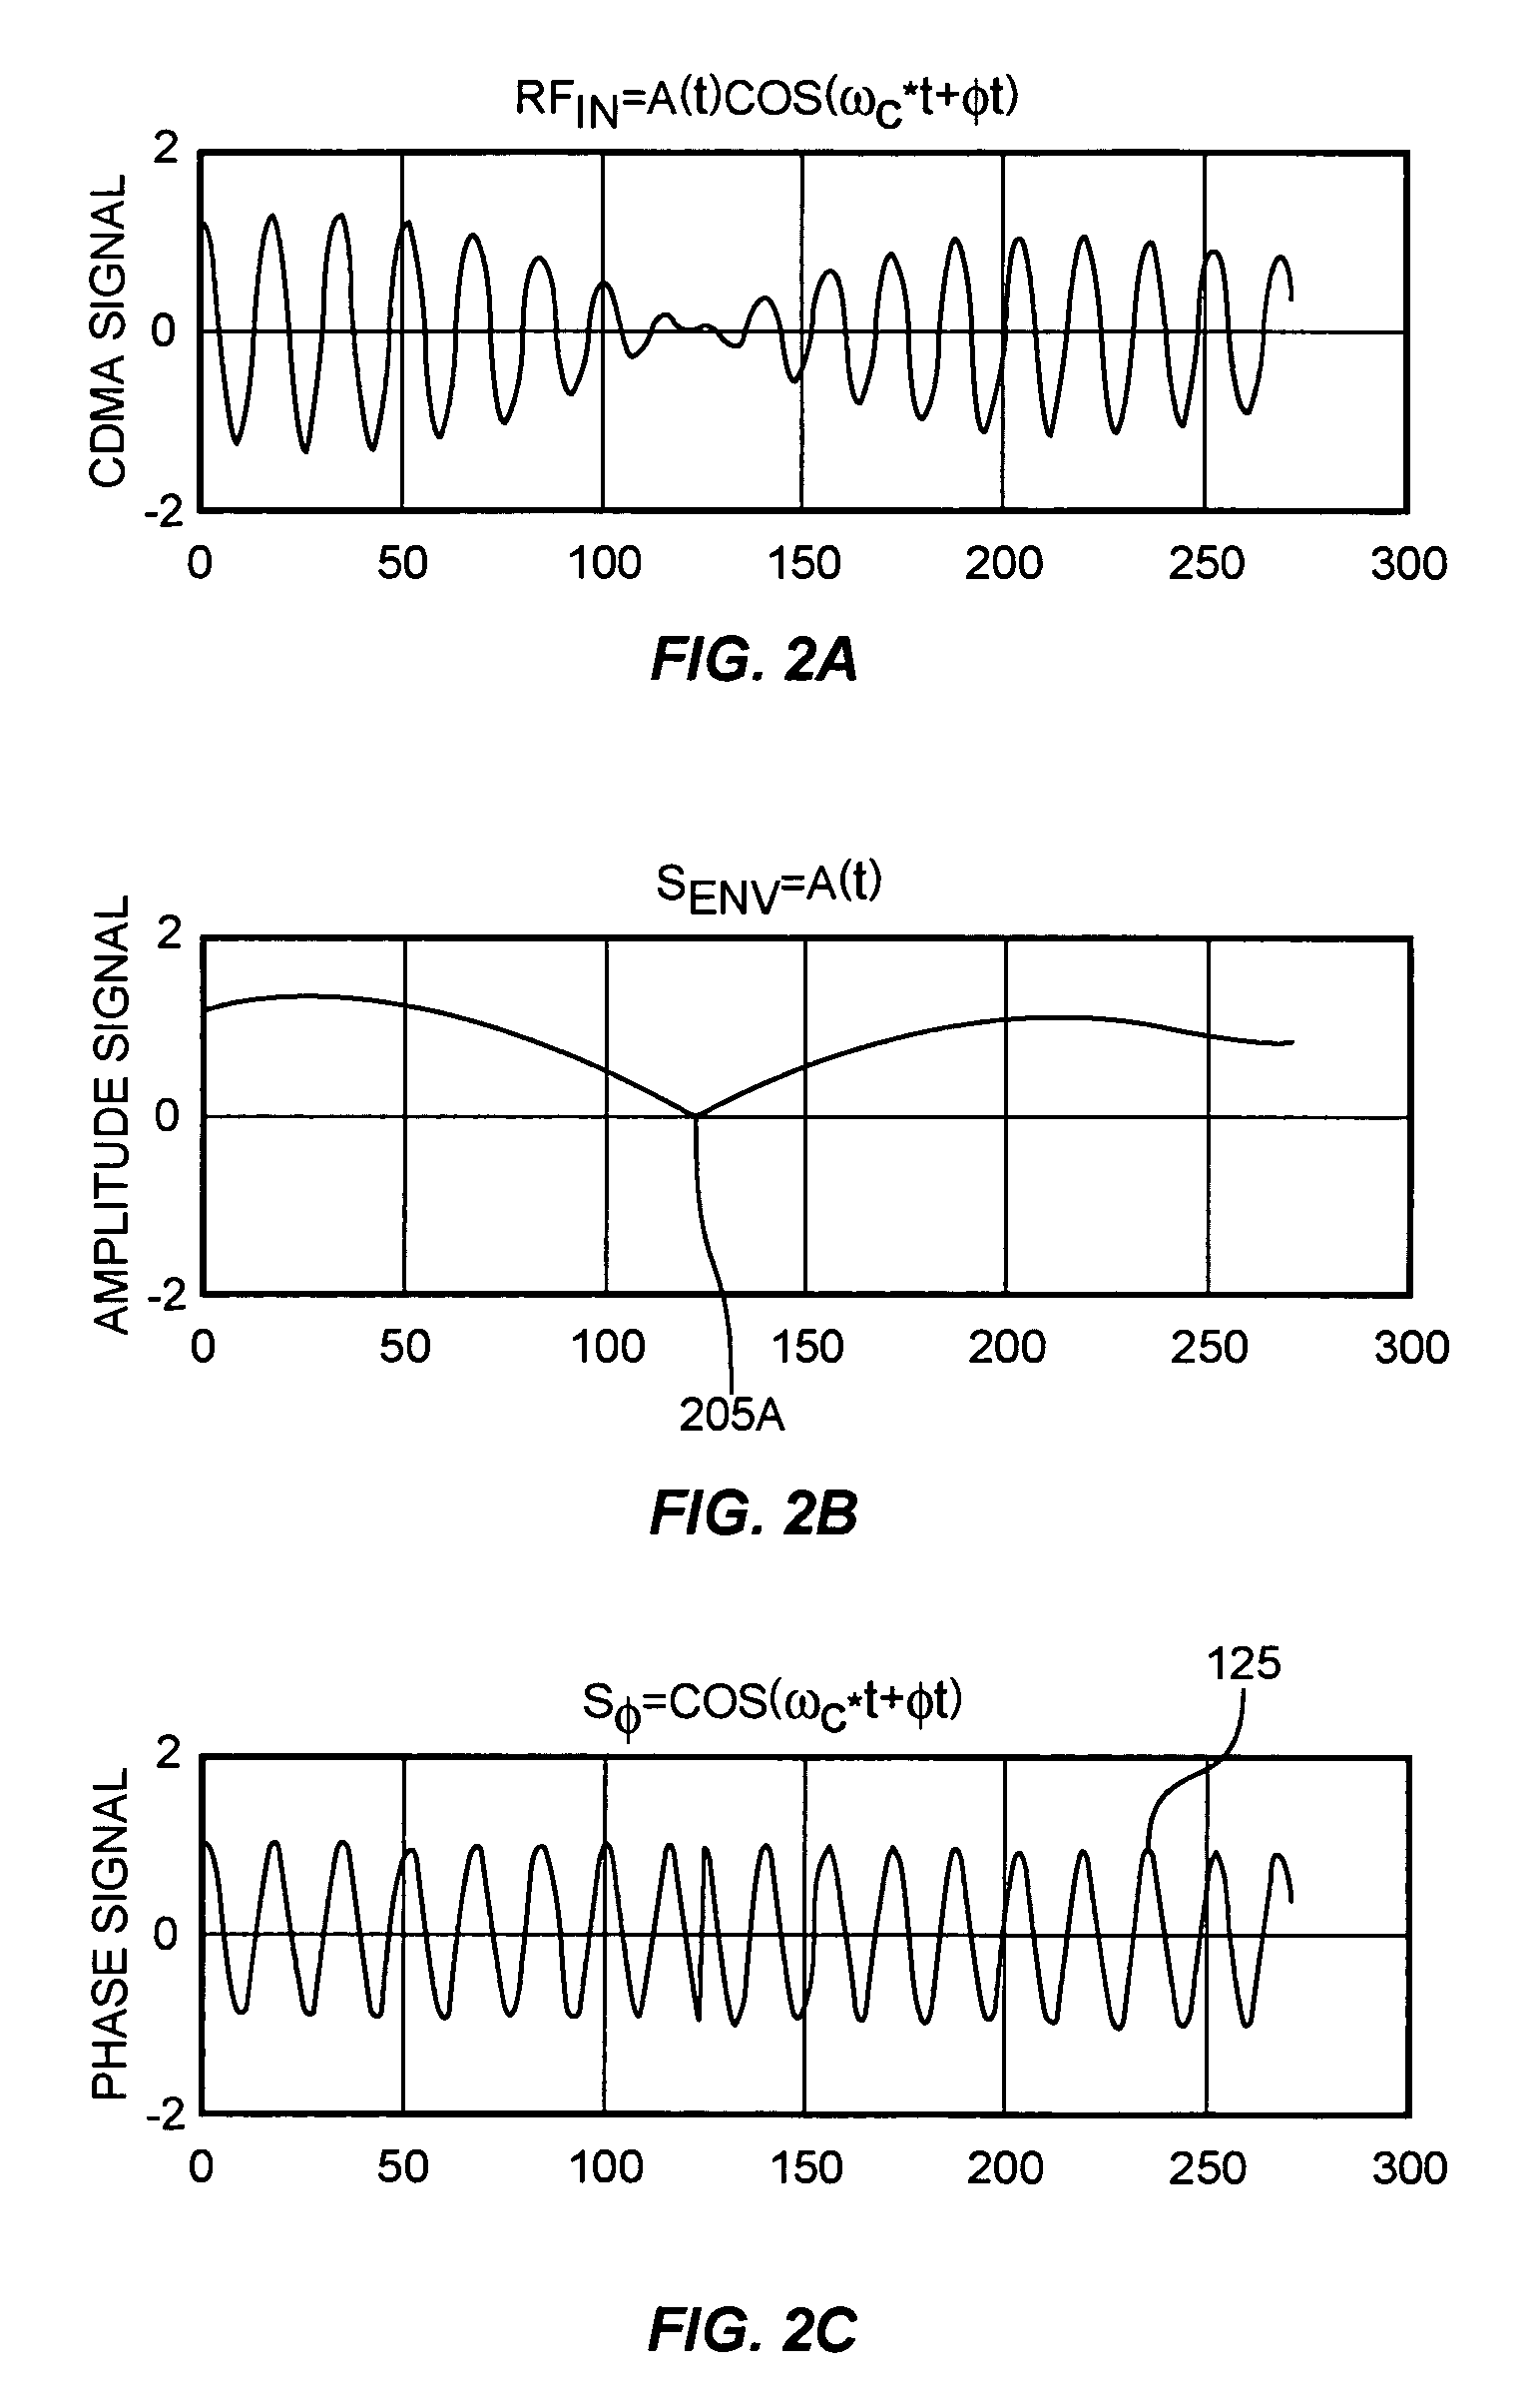 Systems and methods for amplification of a communication signal